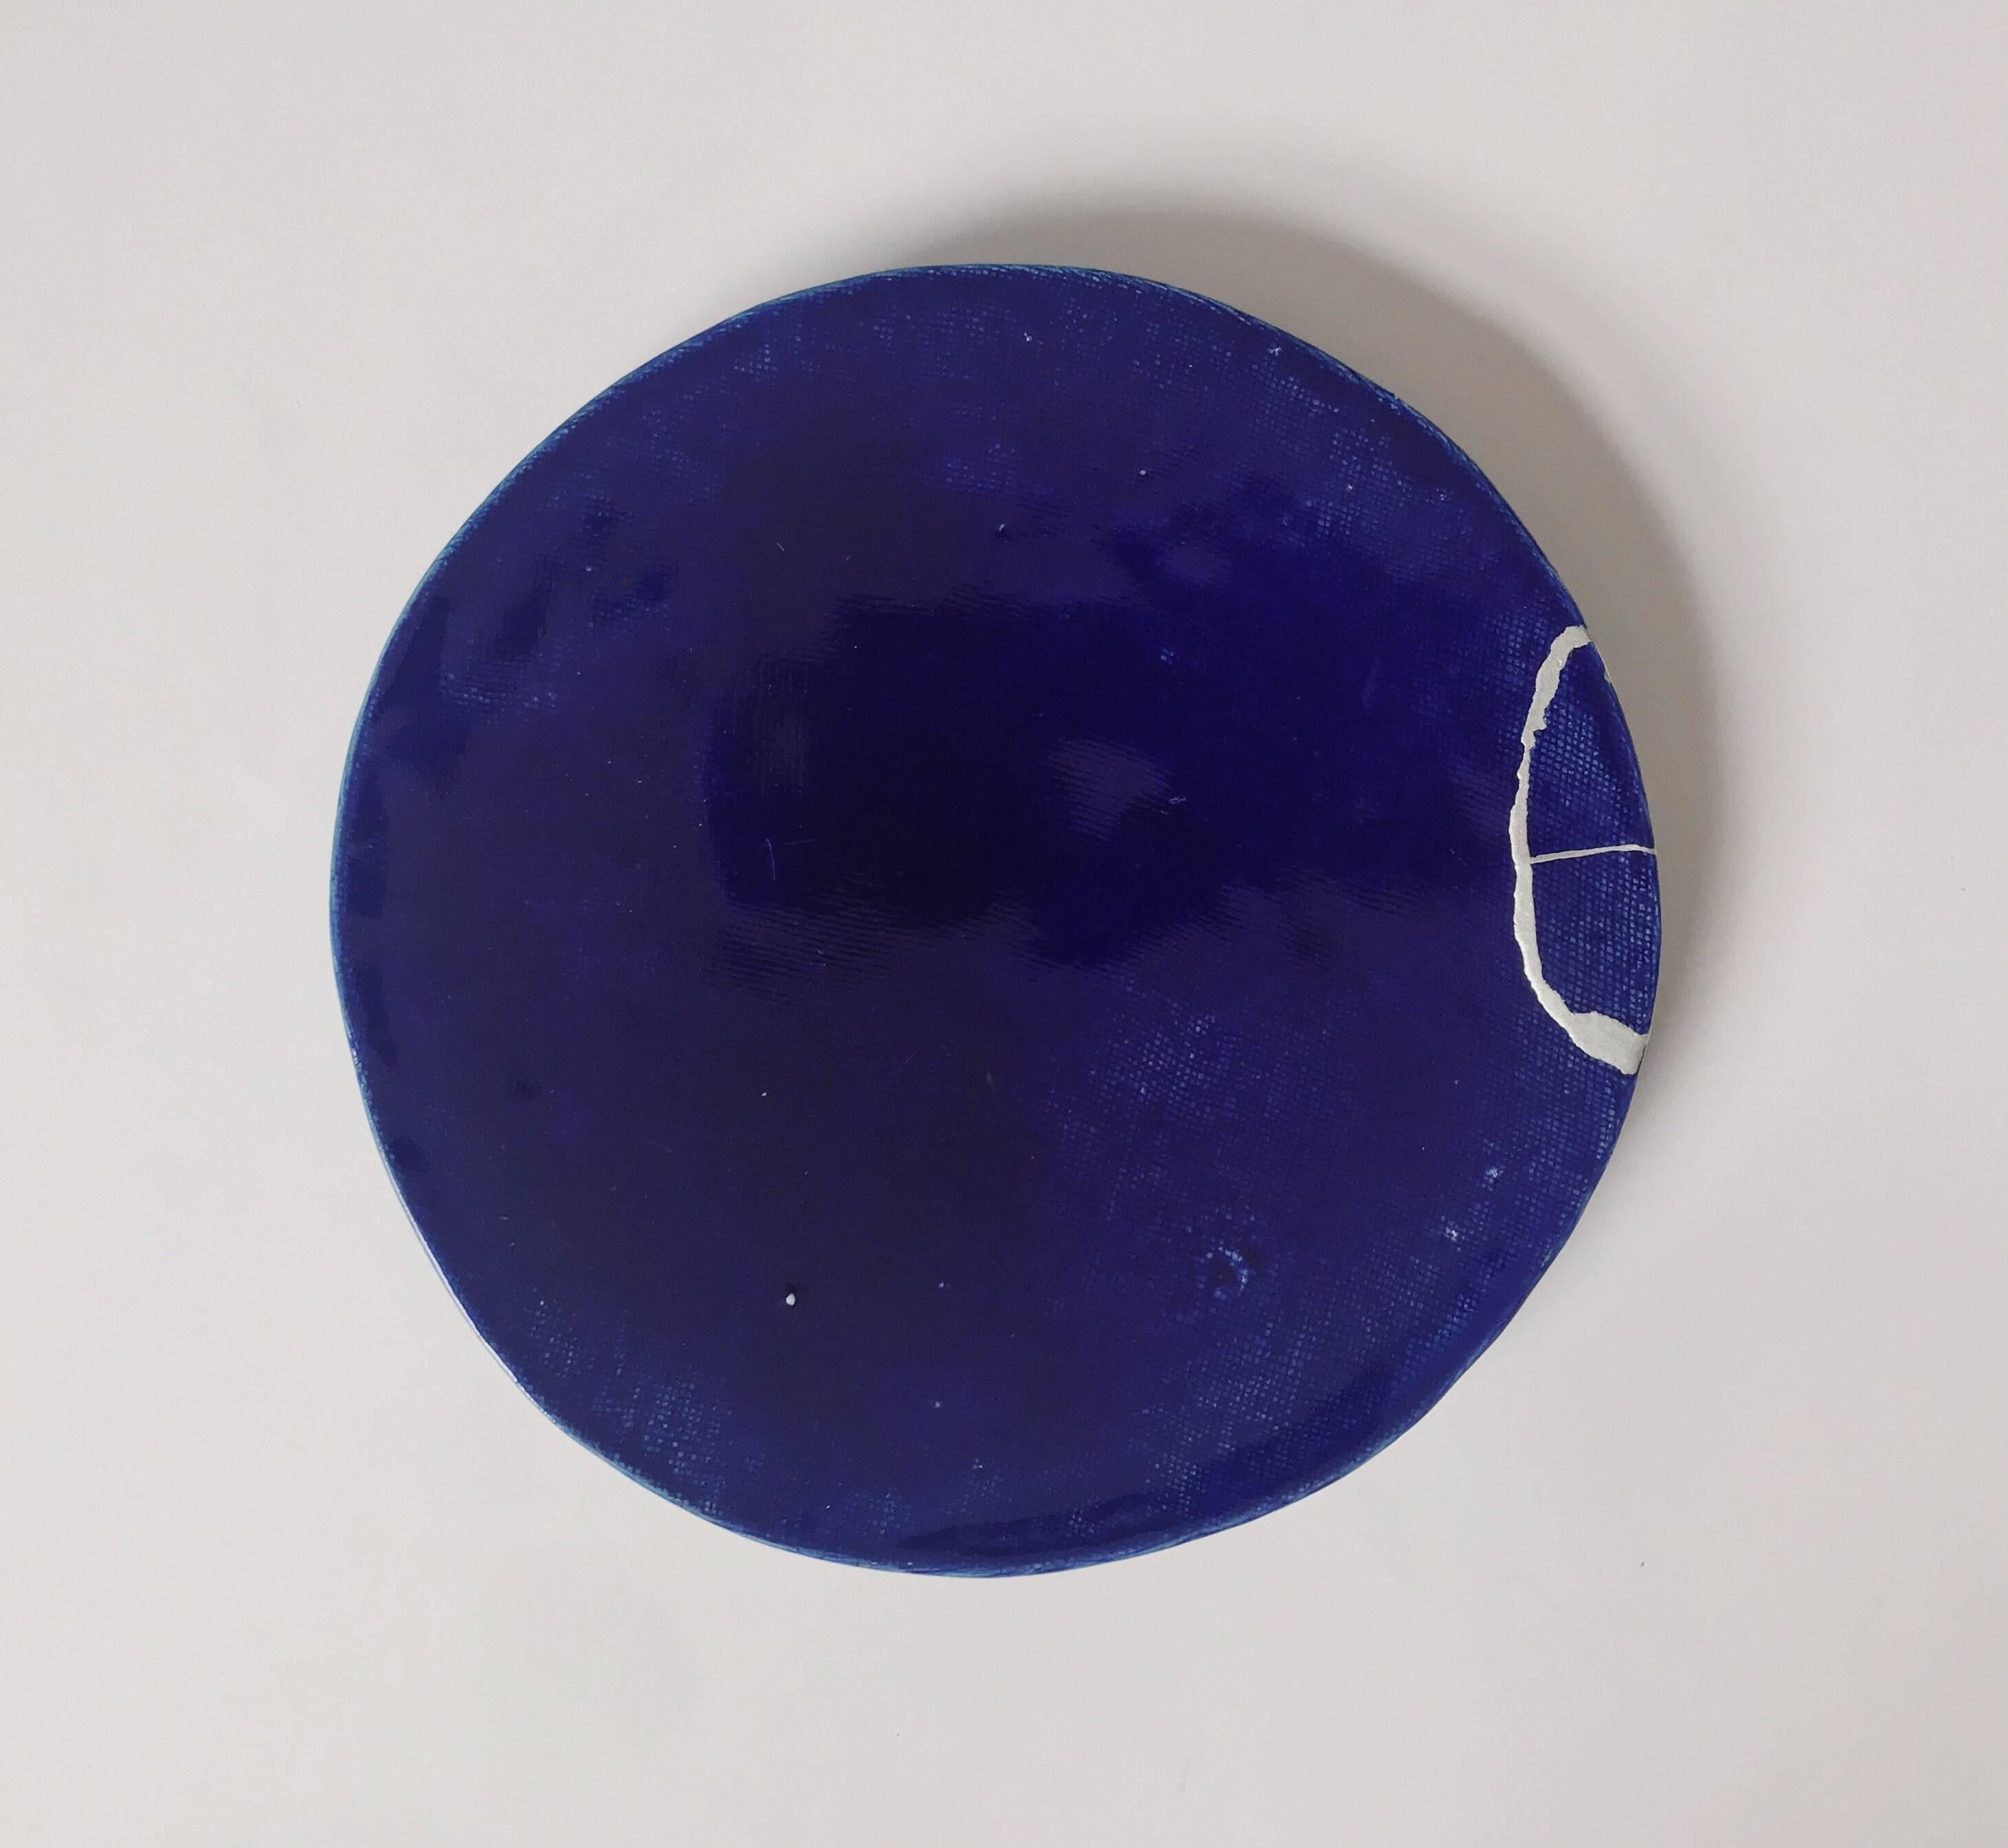 Deep blue ceramic plate from the Sueharu kiln in Konda-Cho, Hyogo Prefecture. Broken and reassembled in the traditional Japanese kintsugi technique by a specialist artisan in Osaka.